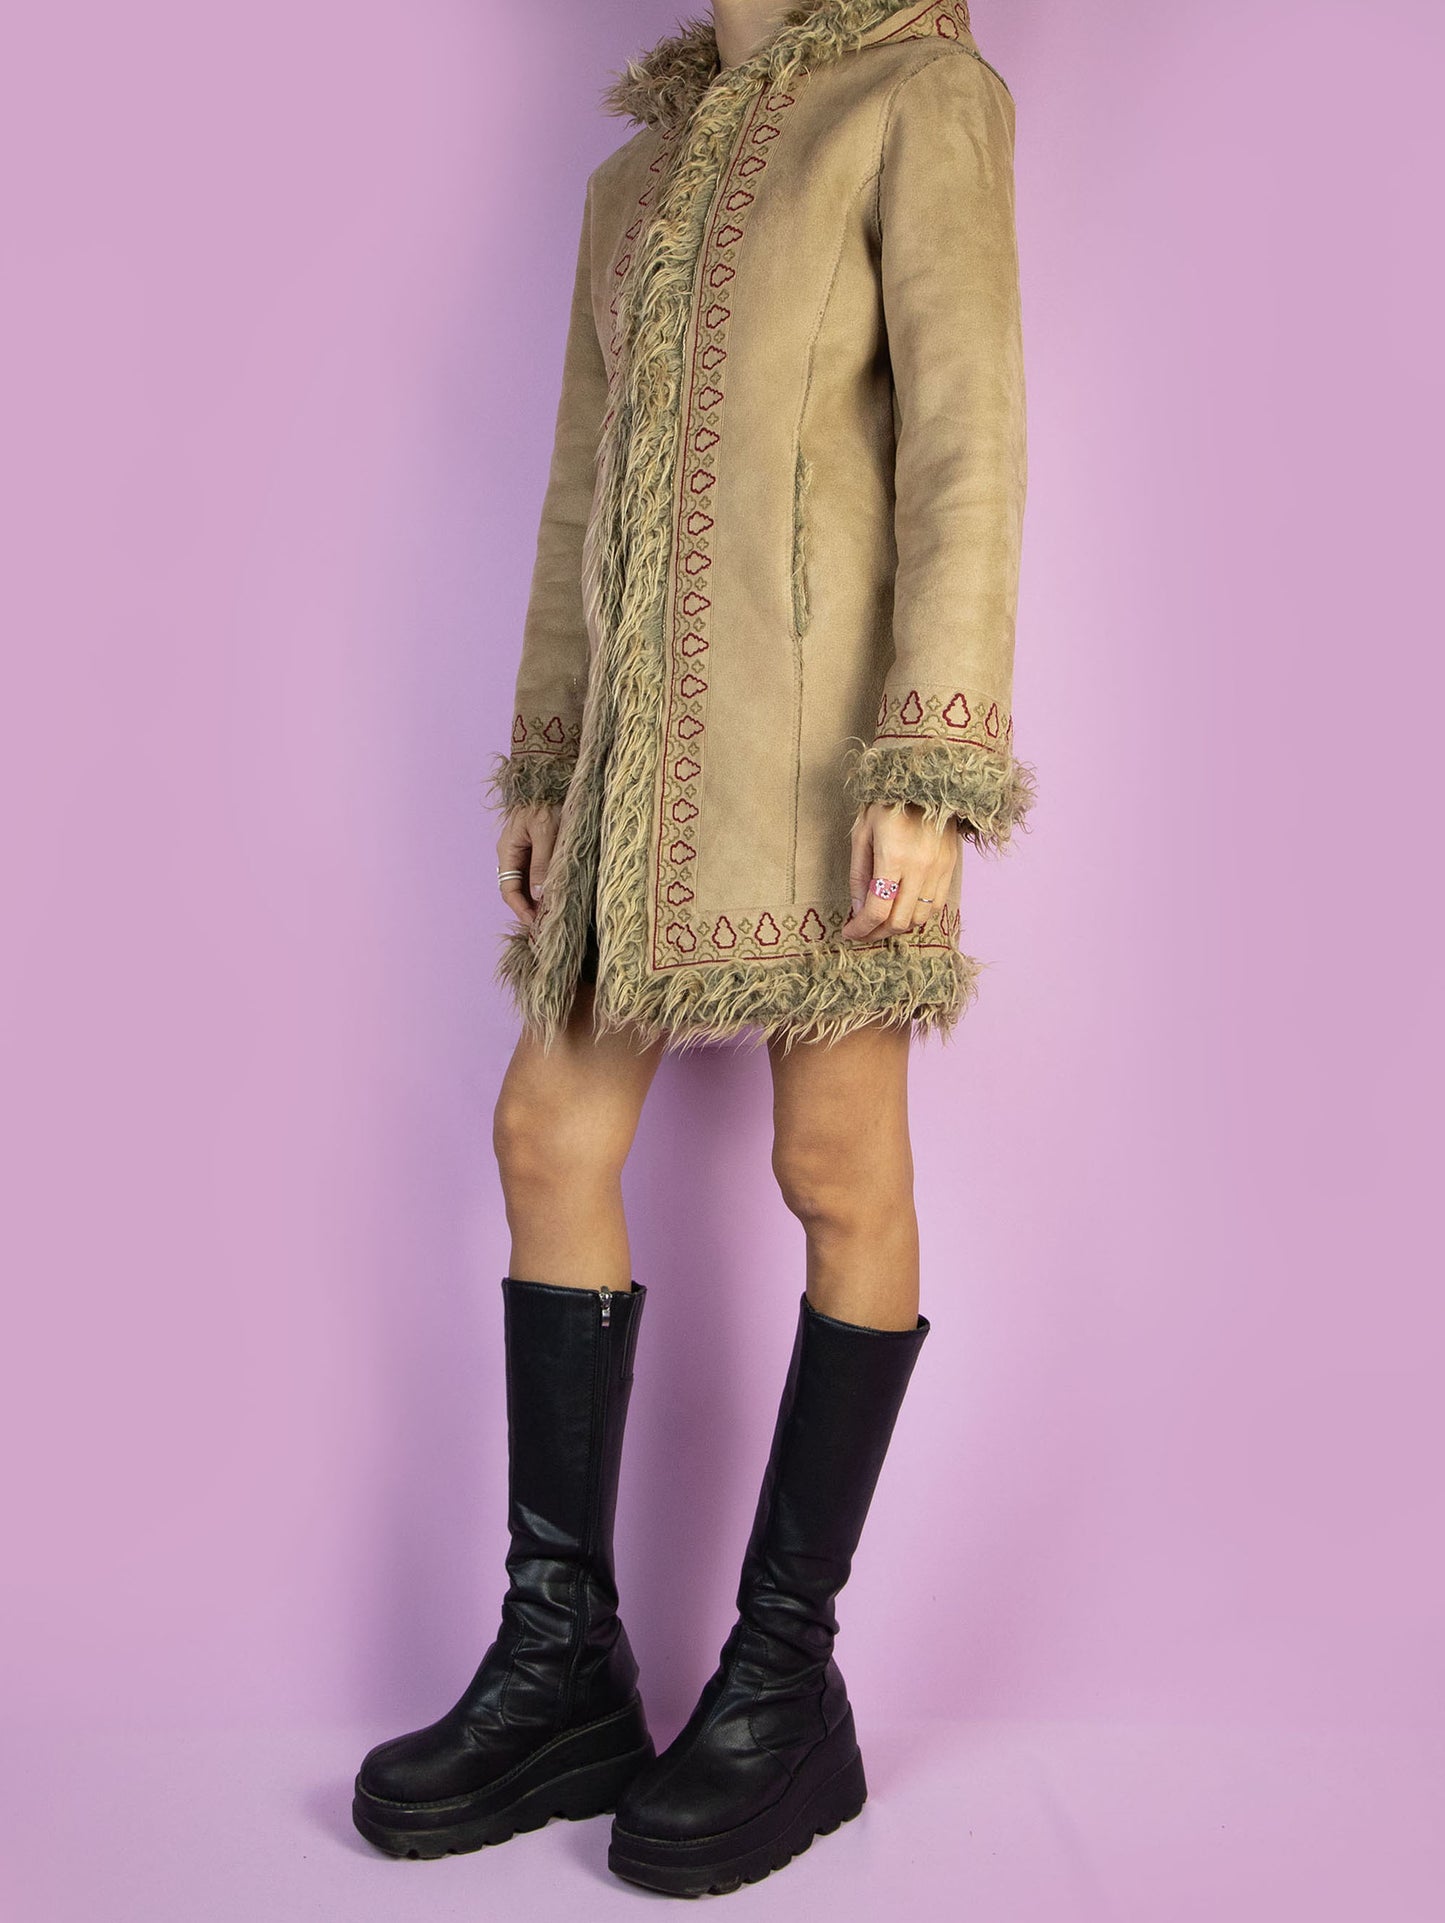 The Y2K Beige Hooded Afghan Coat is a vintage light brown beige faux suede coat with faux fur interior, collar, and cuffs. It also features a hood, pockets, and hook closure. Boho fairy grunge whimsygoth 2000s penny lane winter statement jacket.